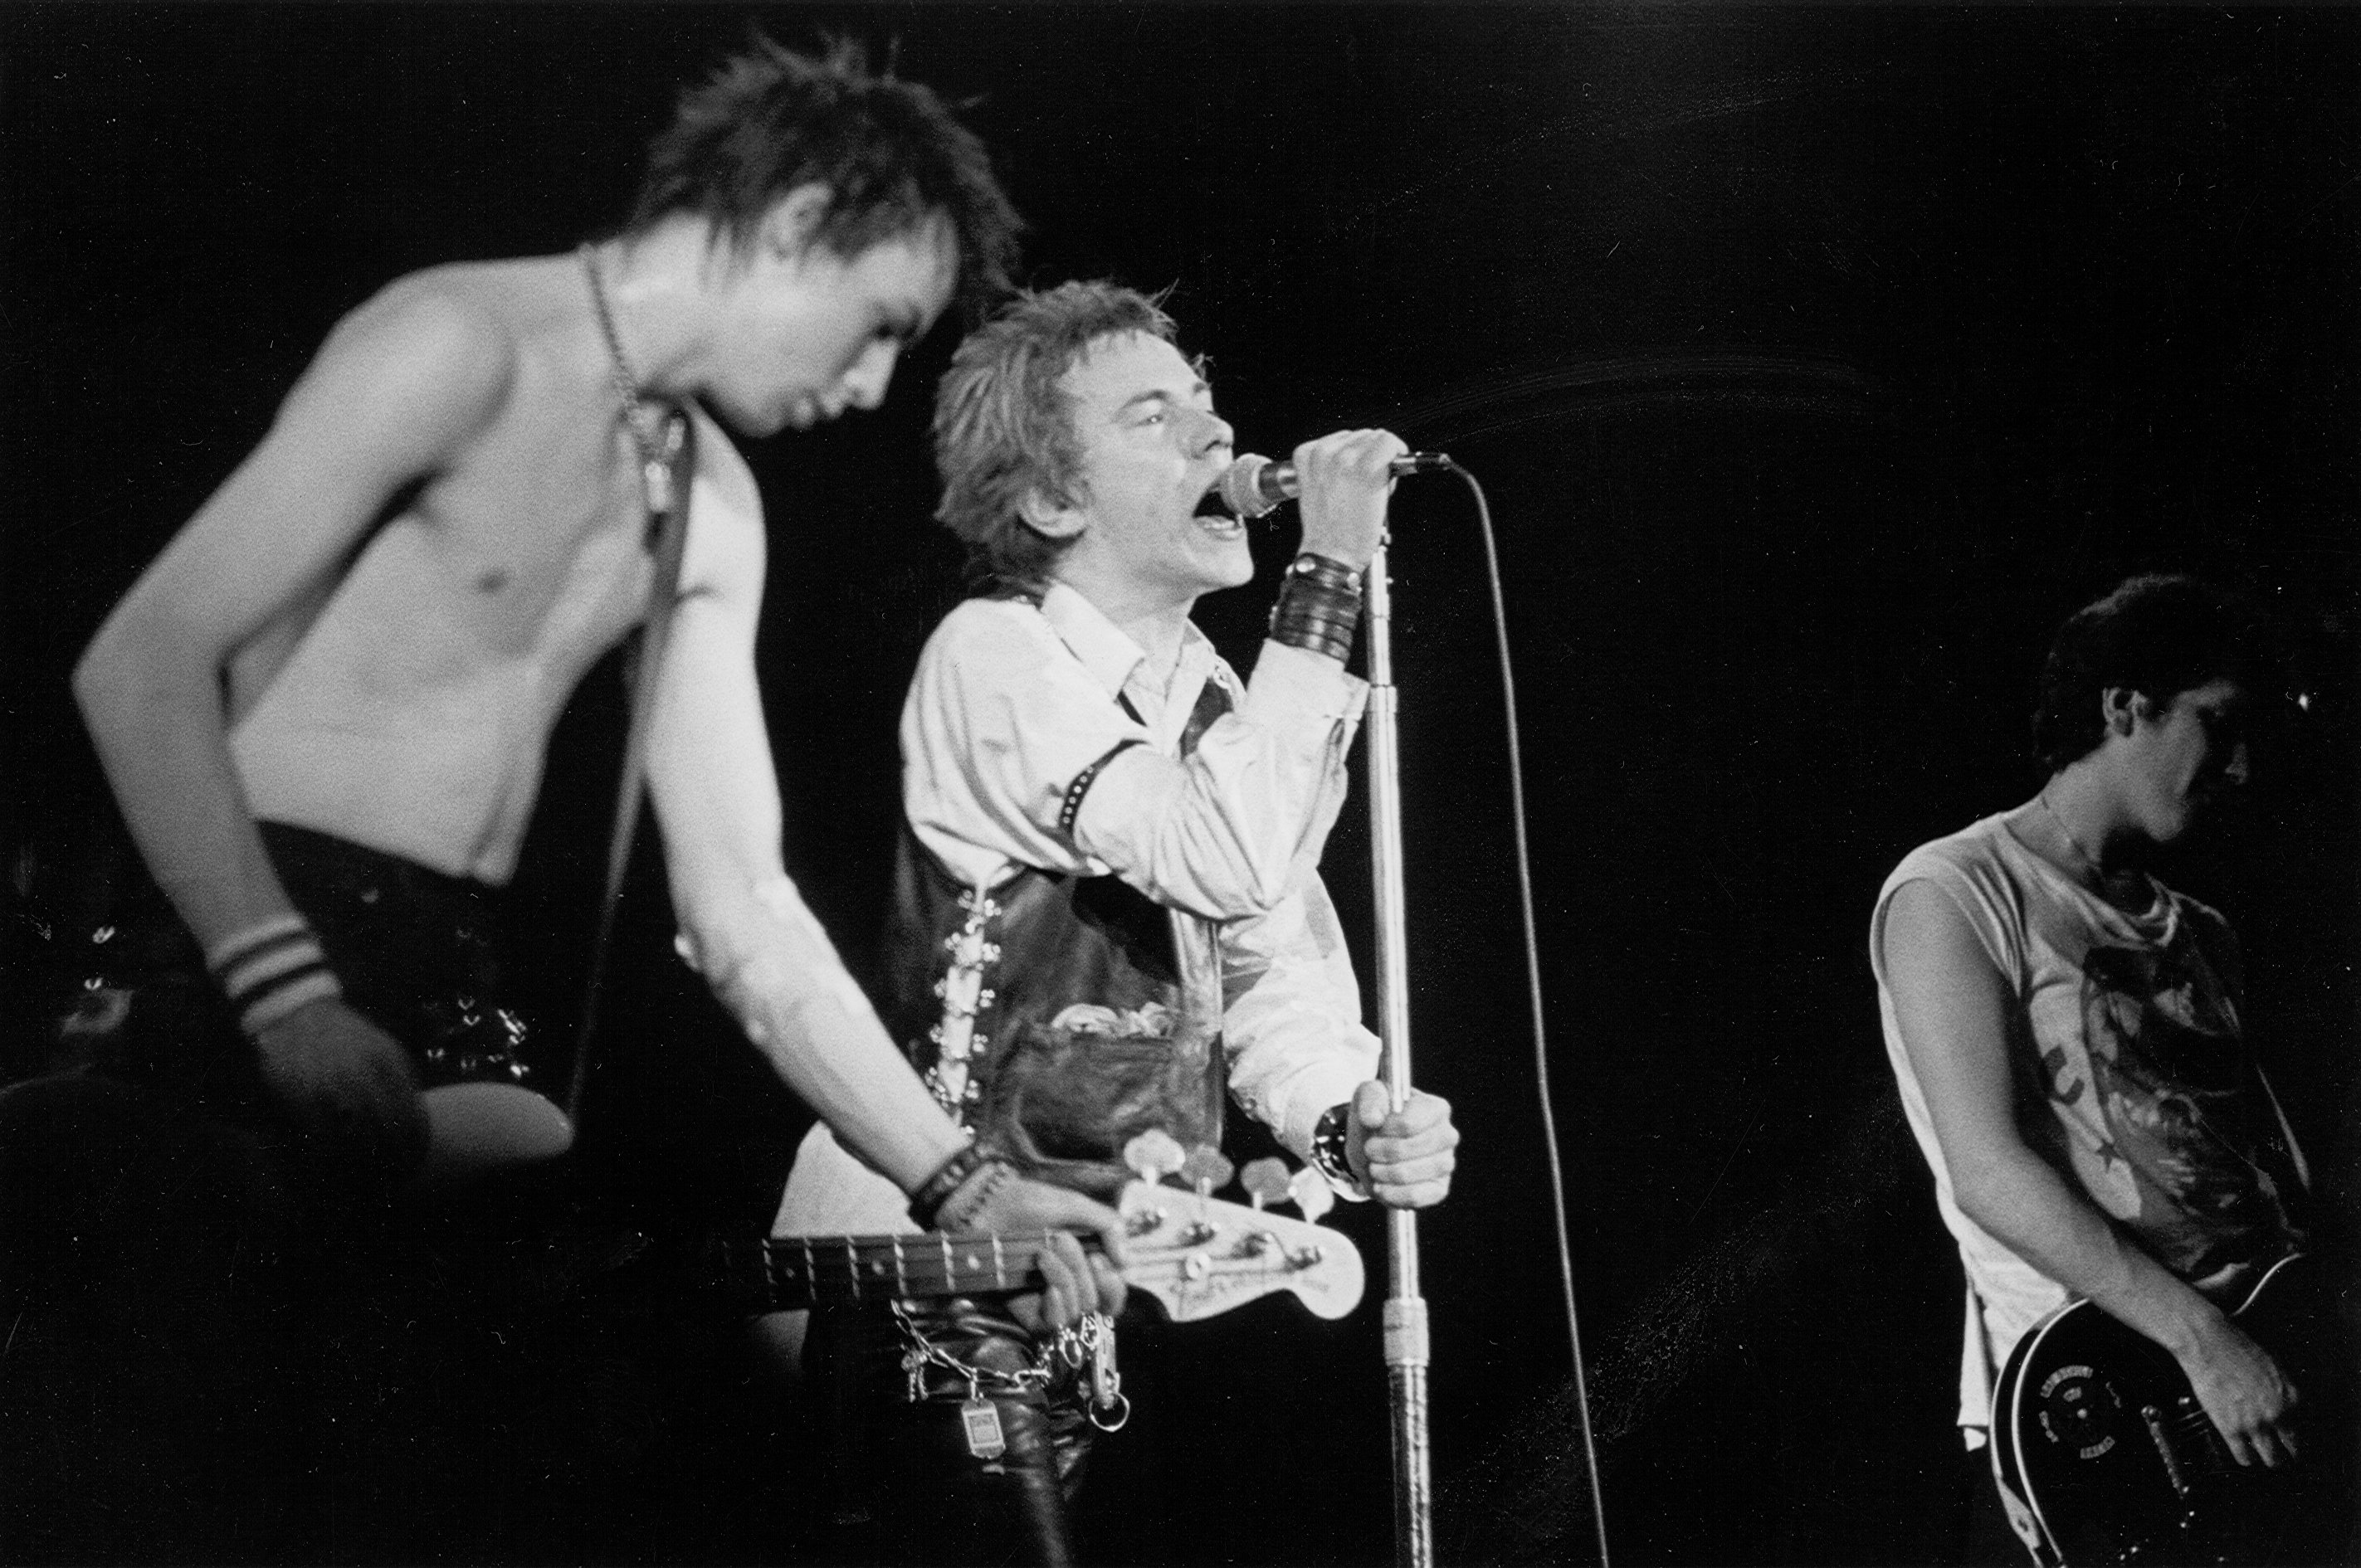 Members of the Sex Pistols in black-and-white